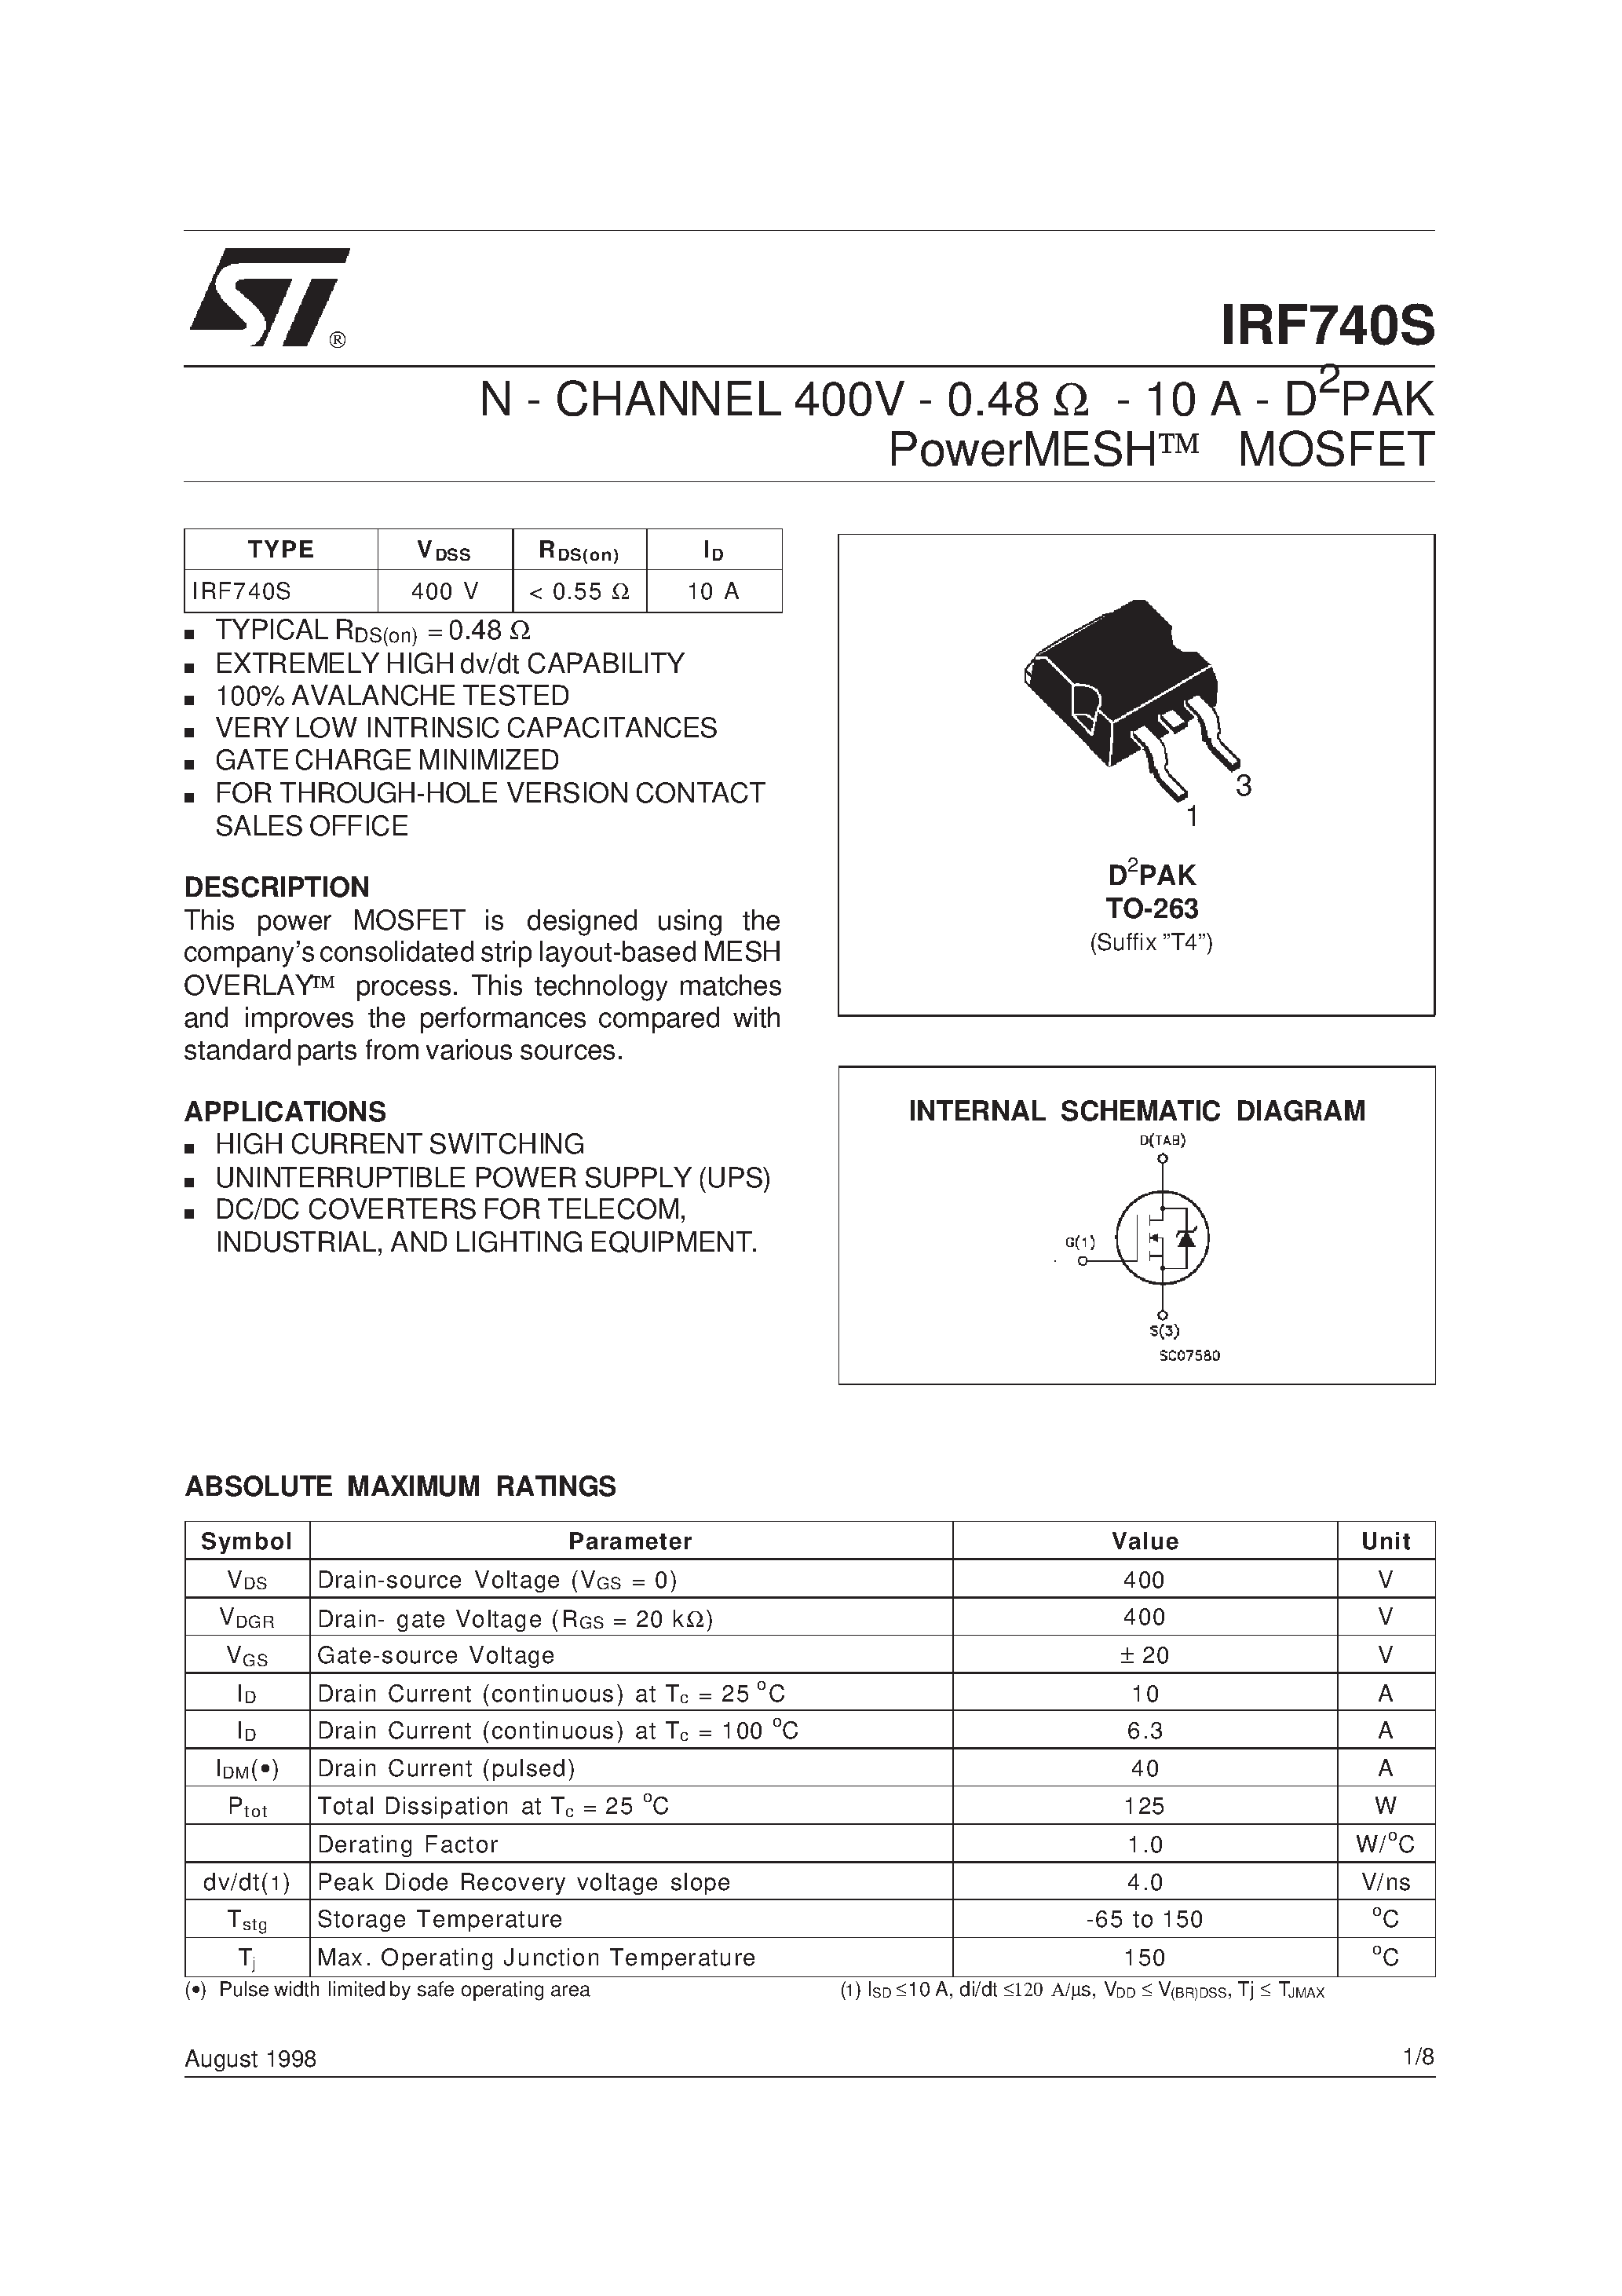 Datasheet IRF740S - N - CHANNEL 400V - 0.48 ohm - 10 A - D2PAK PowerMESH] MOSFET page 1